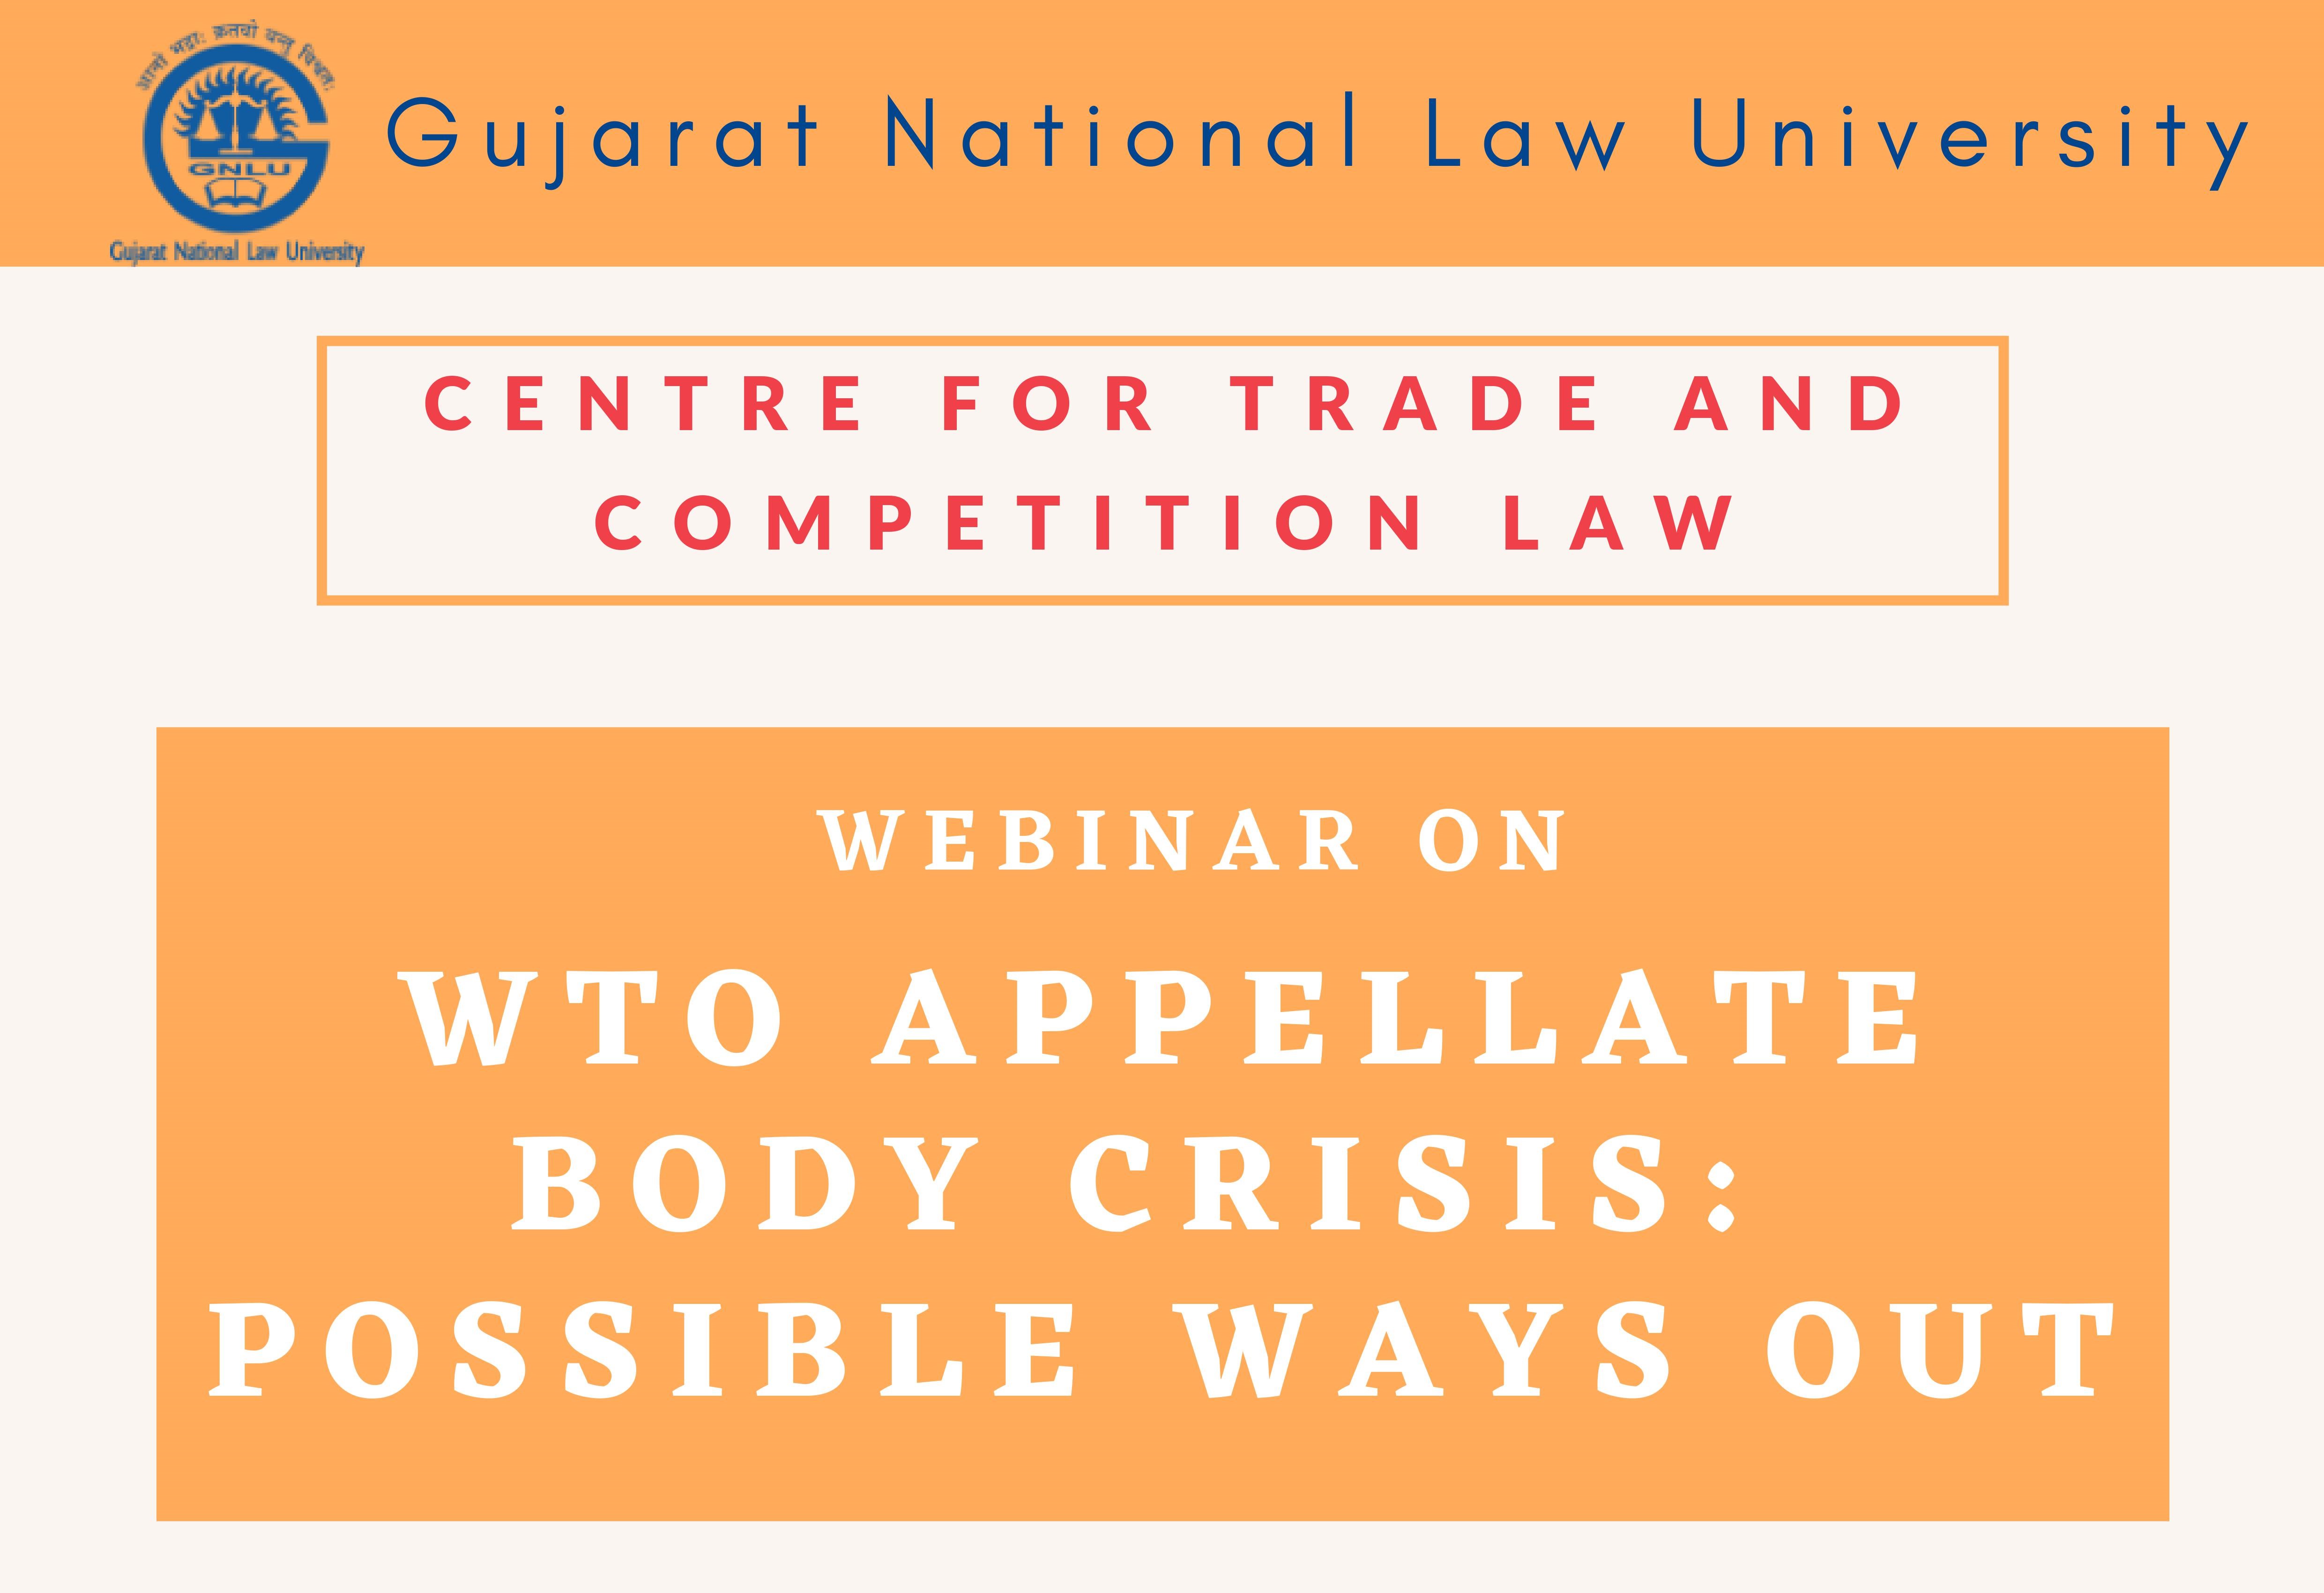 GNLU Webinar on WTO Appellate Body Crisis and Possible Ways Out